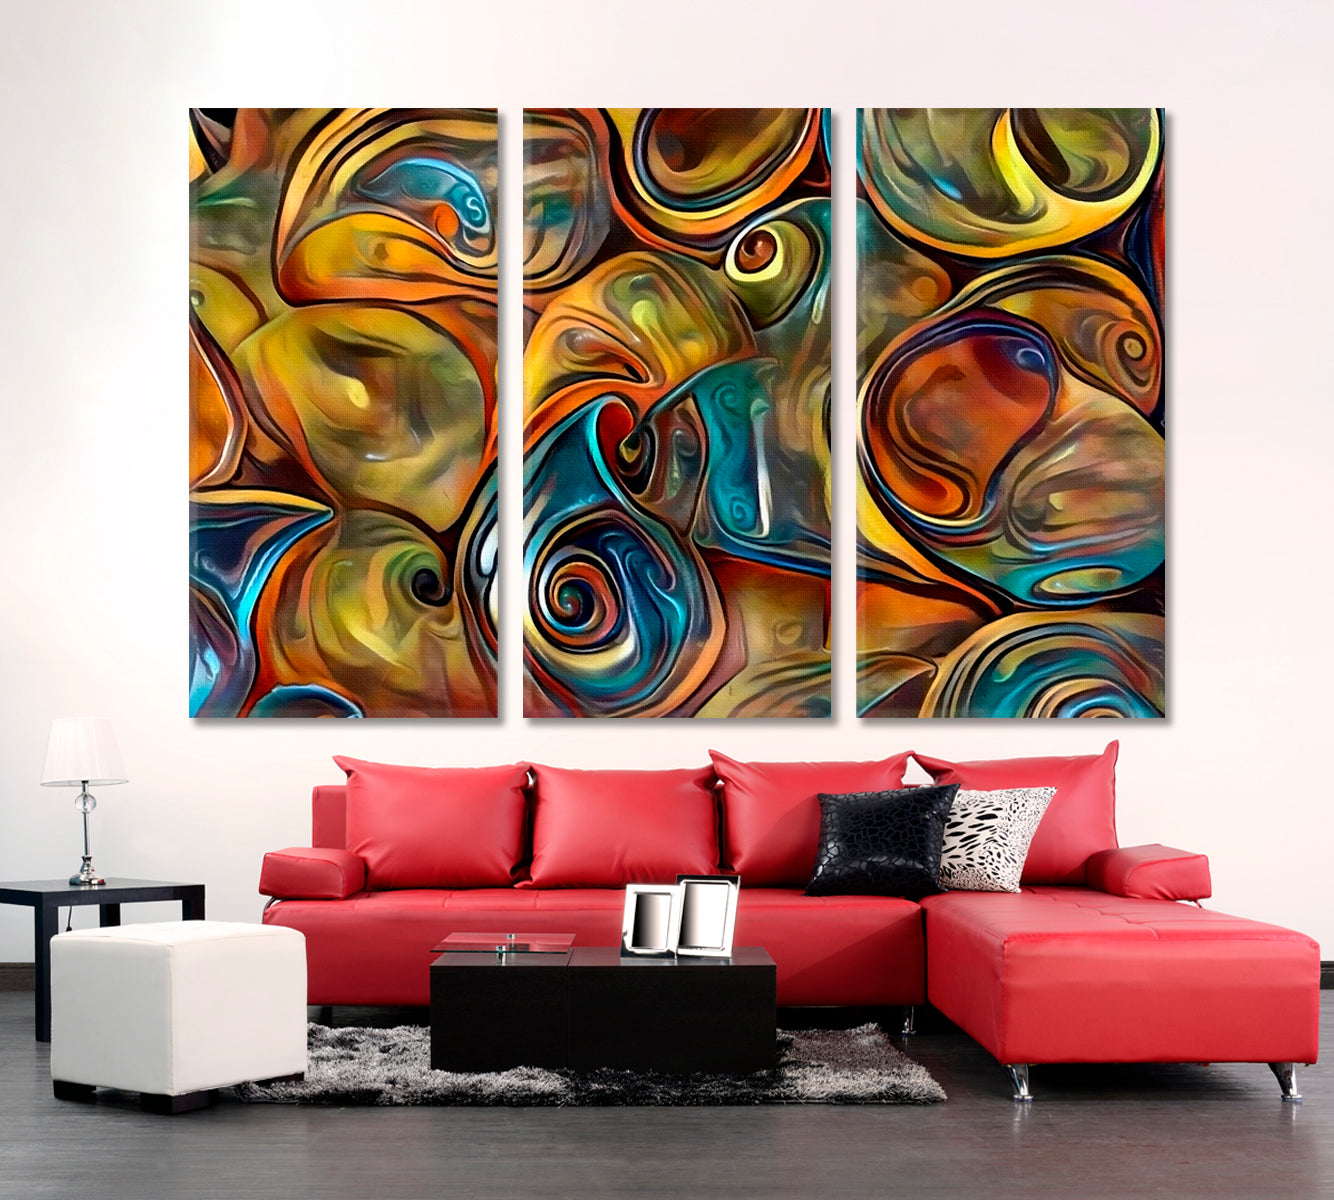 ABSTRACT SEASHELLS  Fluid Lines and Color Movement Abstract Art Print Artesty 3 panels 36" x 24" 